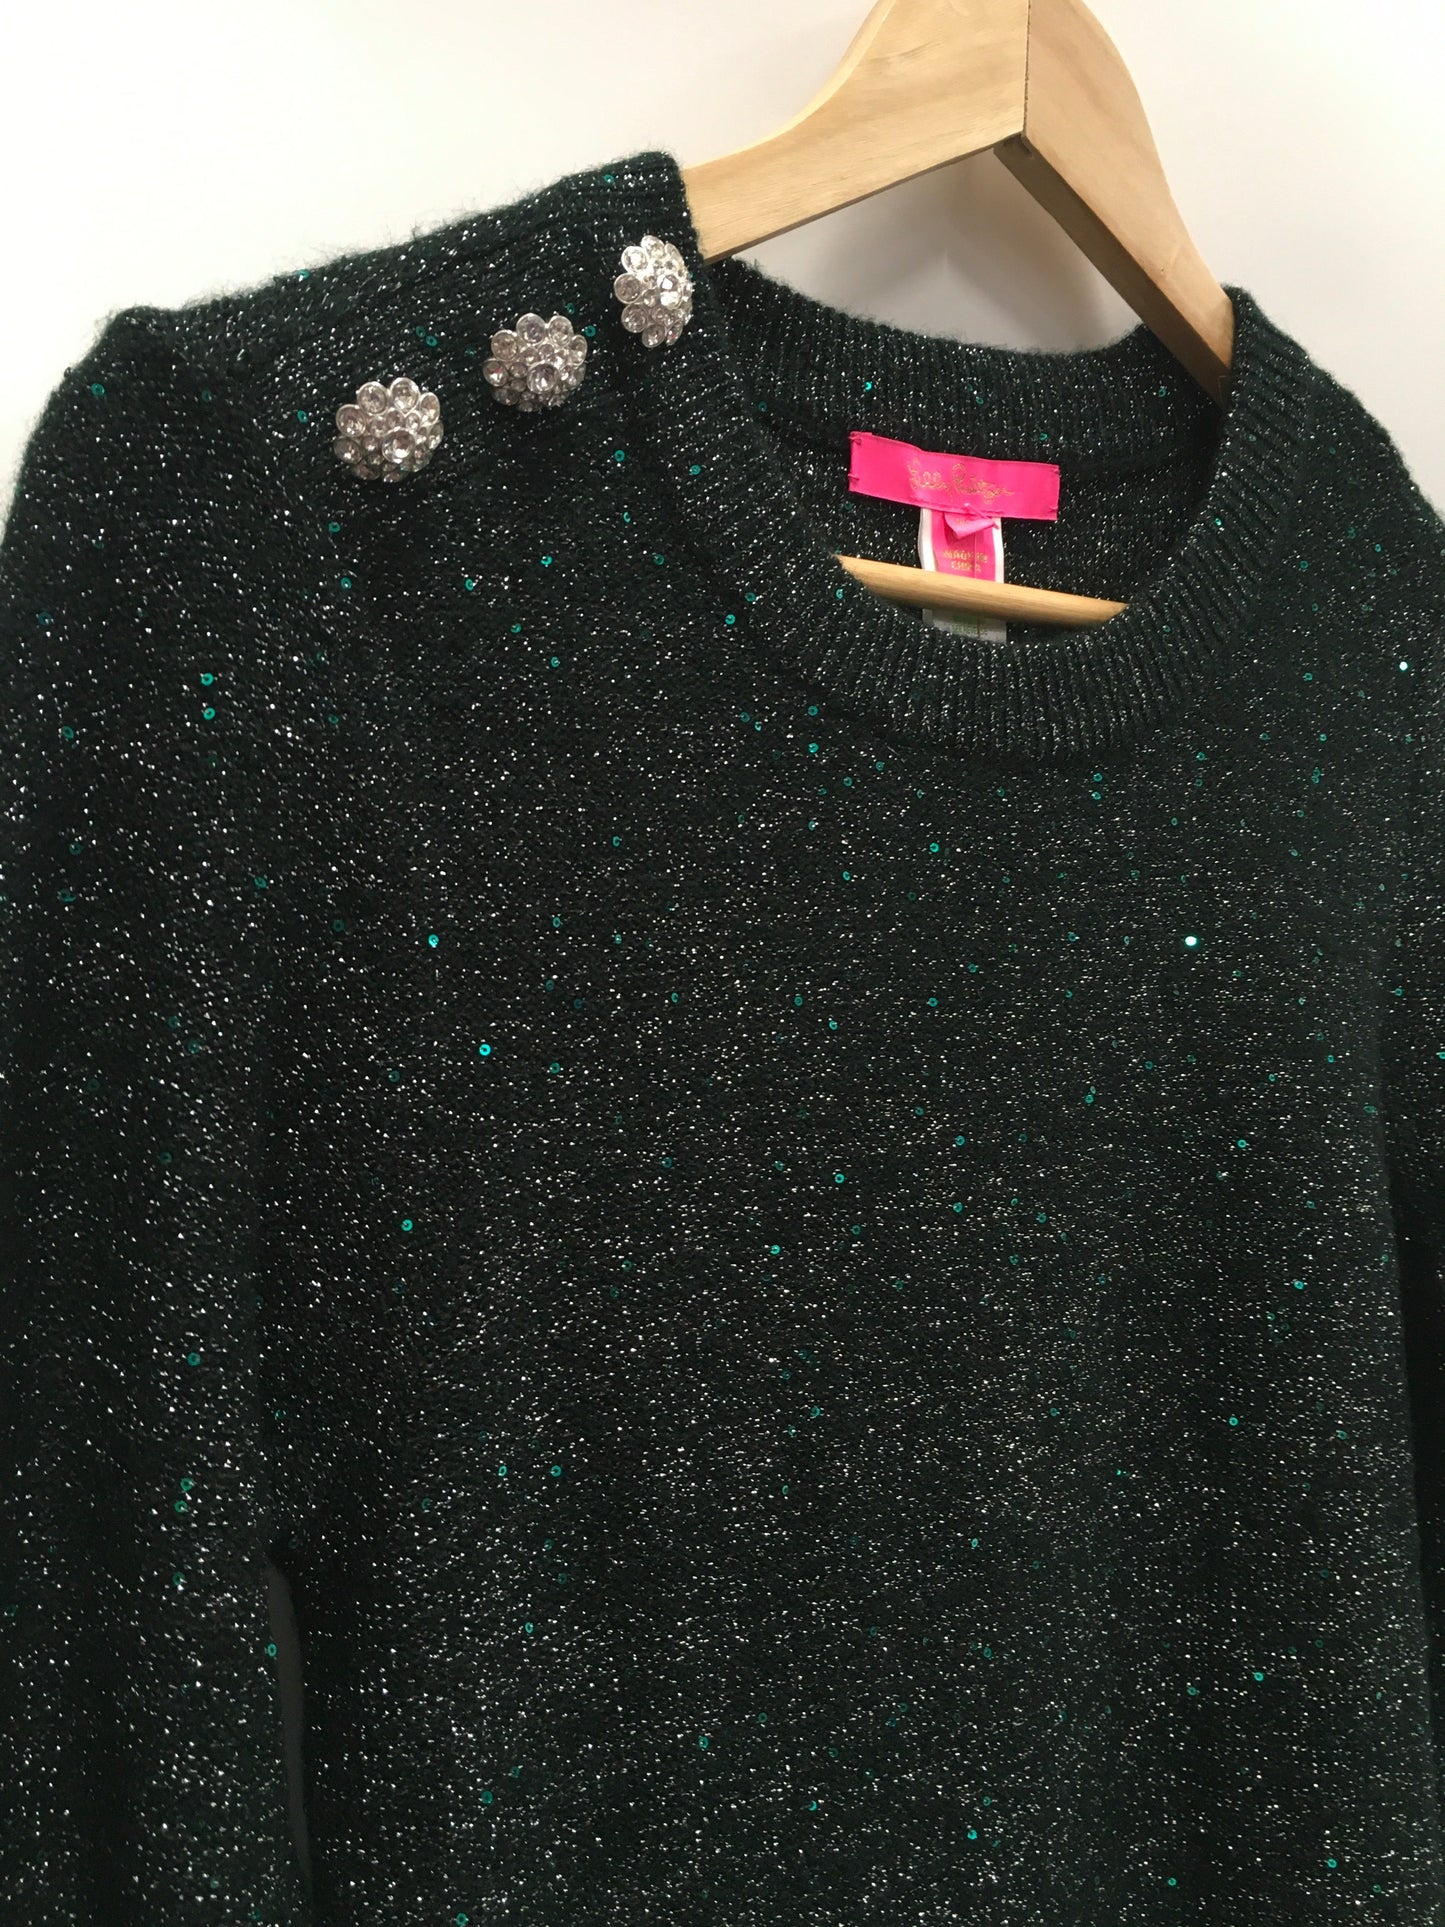 Dress Sweater By Lilly Pulitzer  Size: M